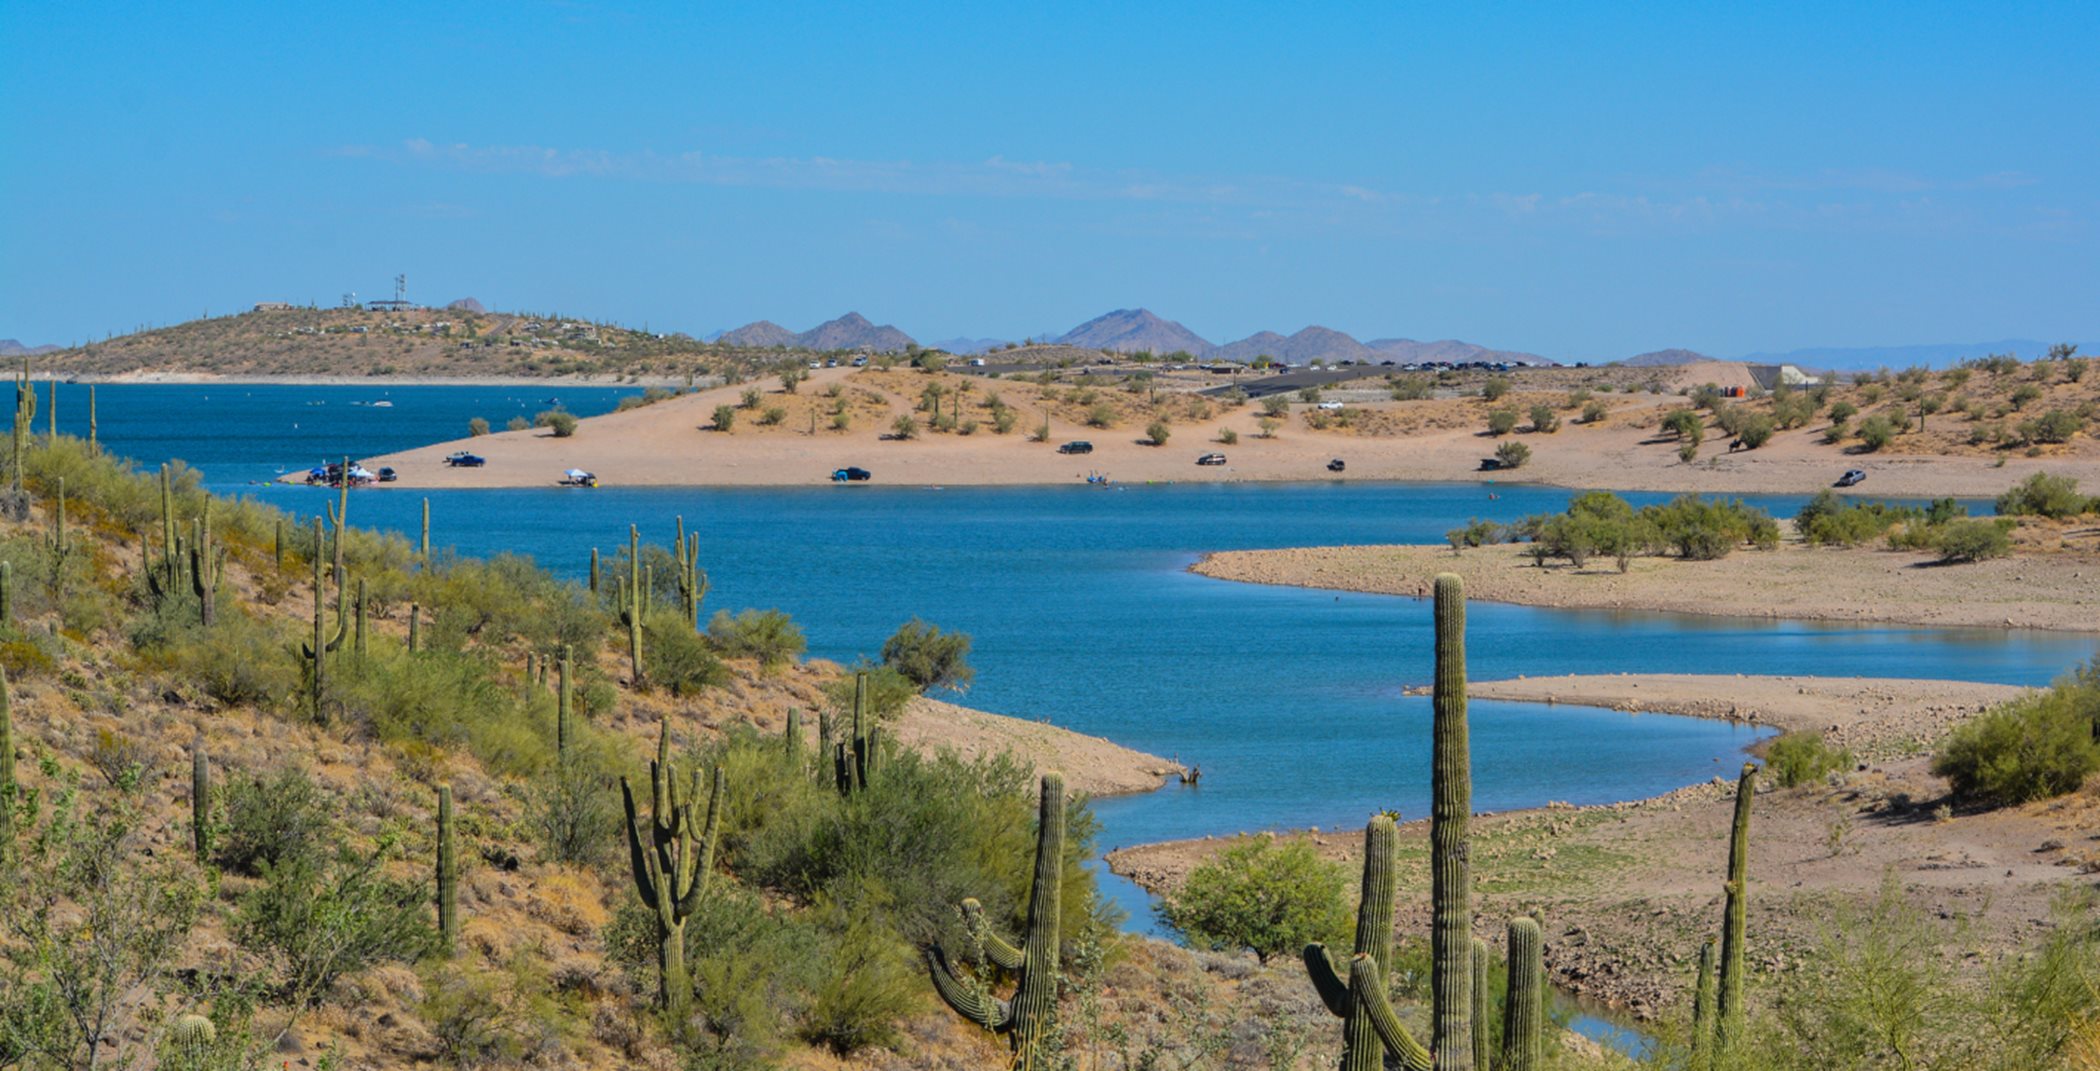 View of lake pleasant and the surrounding desert landscape